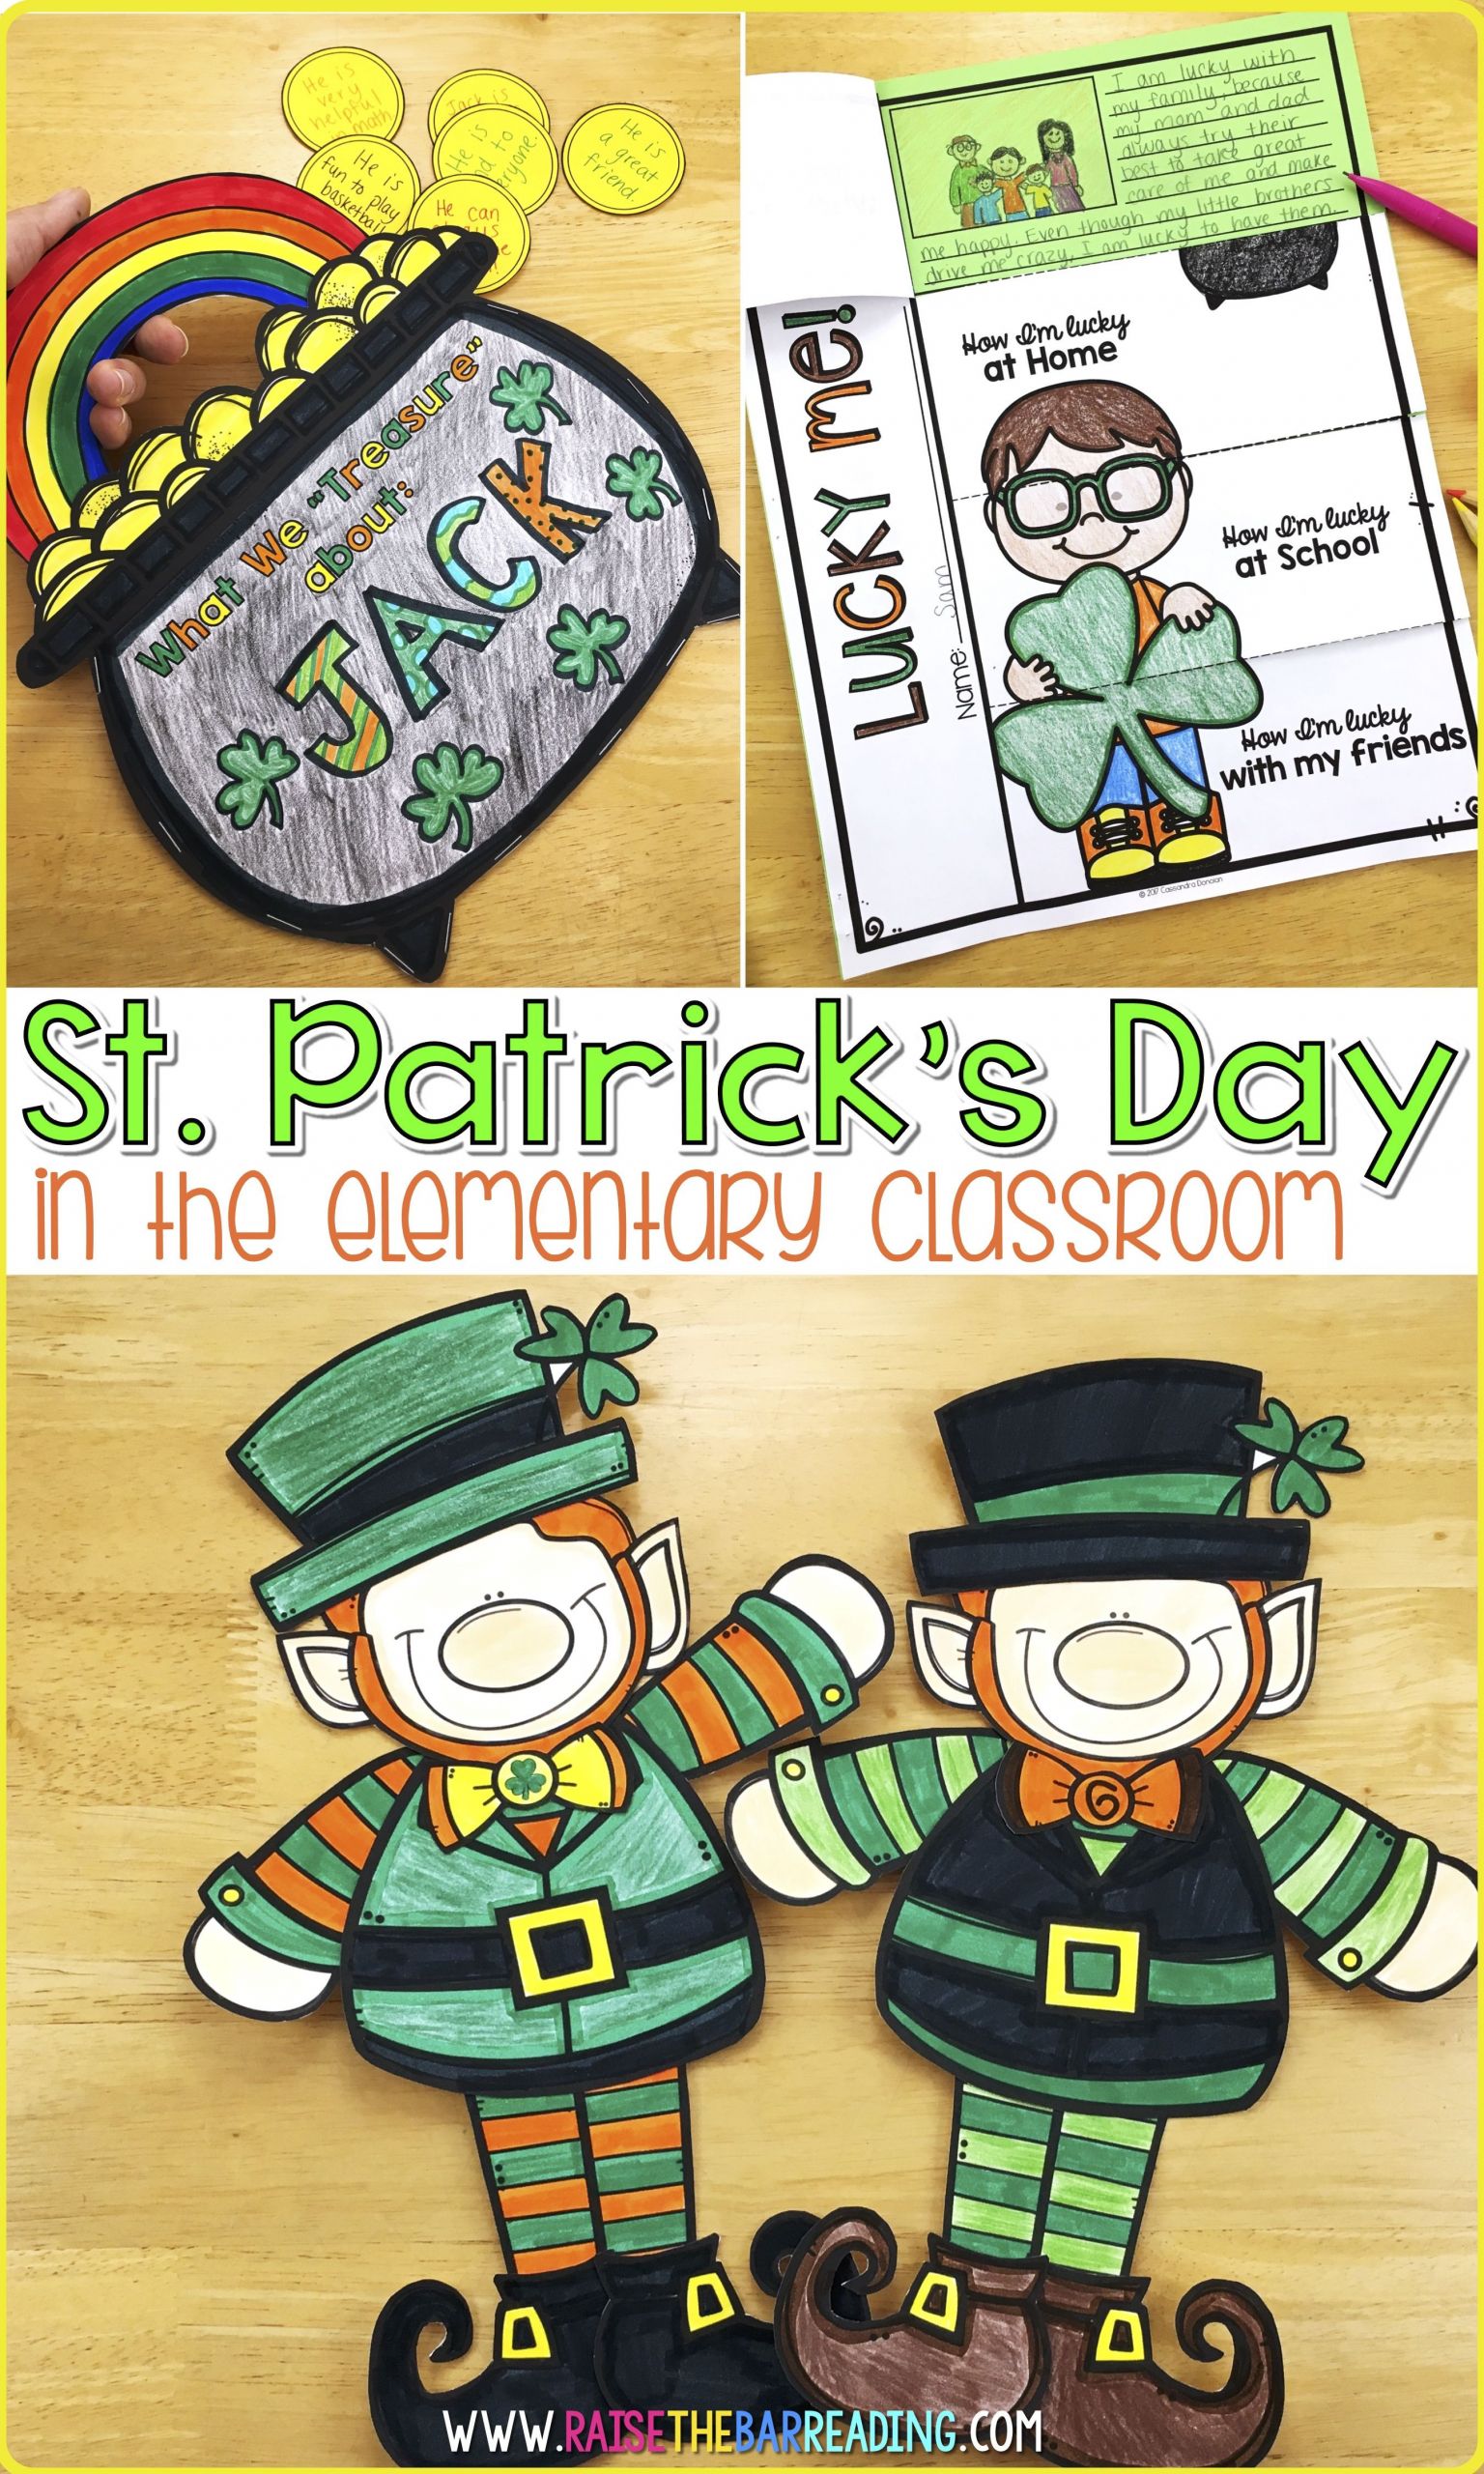 St Patrick's Day Crafts For Elementary Students
 Low Prep St Patrick’s Day Activities for Elementary